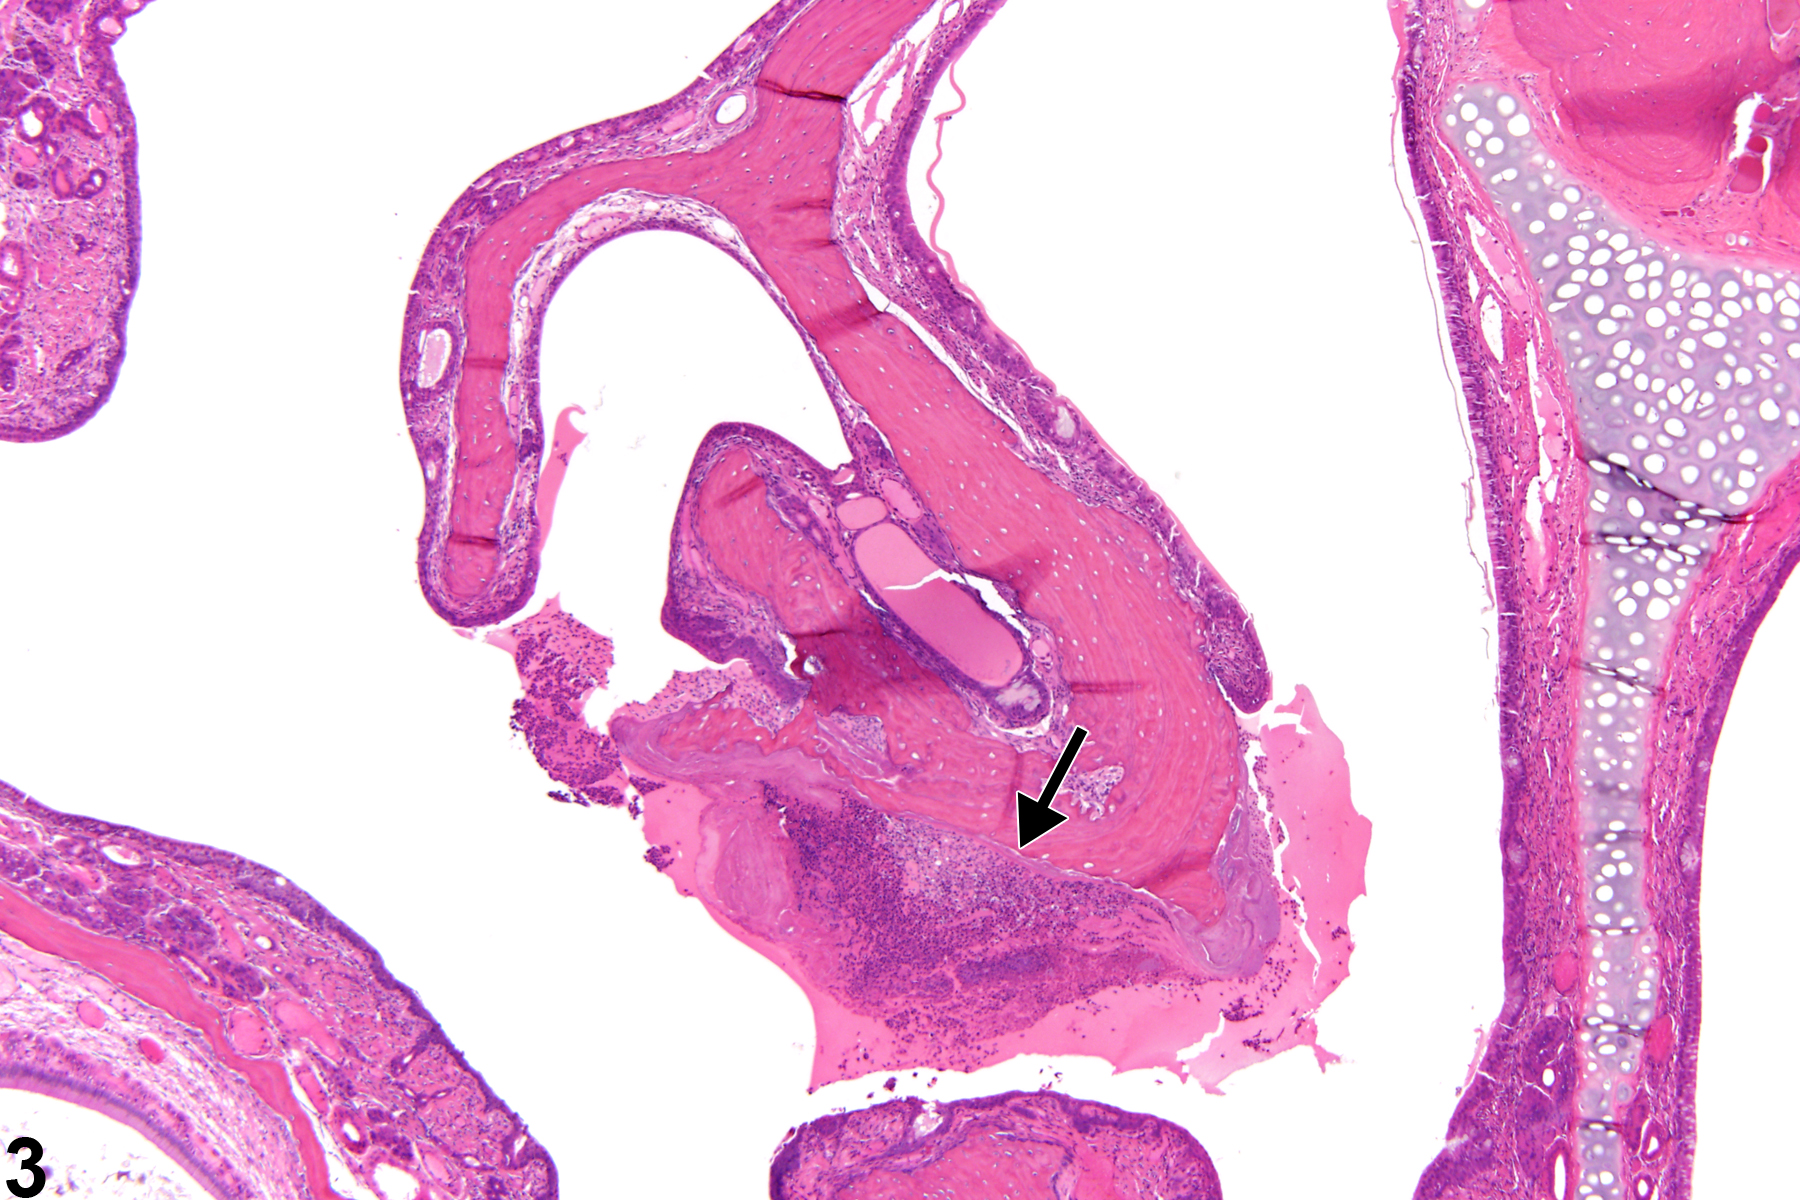 Image of inflammation in the nose, respiratory epithelium from a male F344/N rat in a chronic study